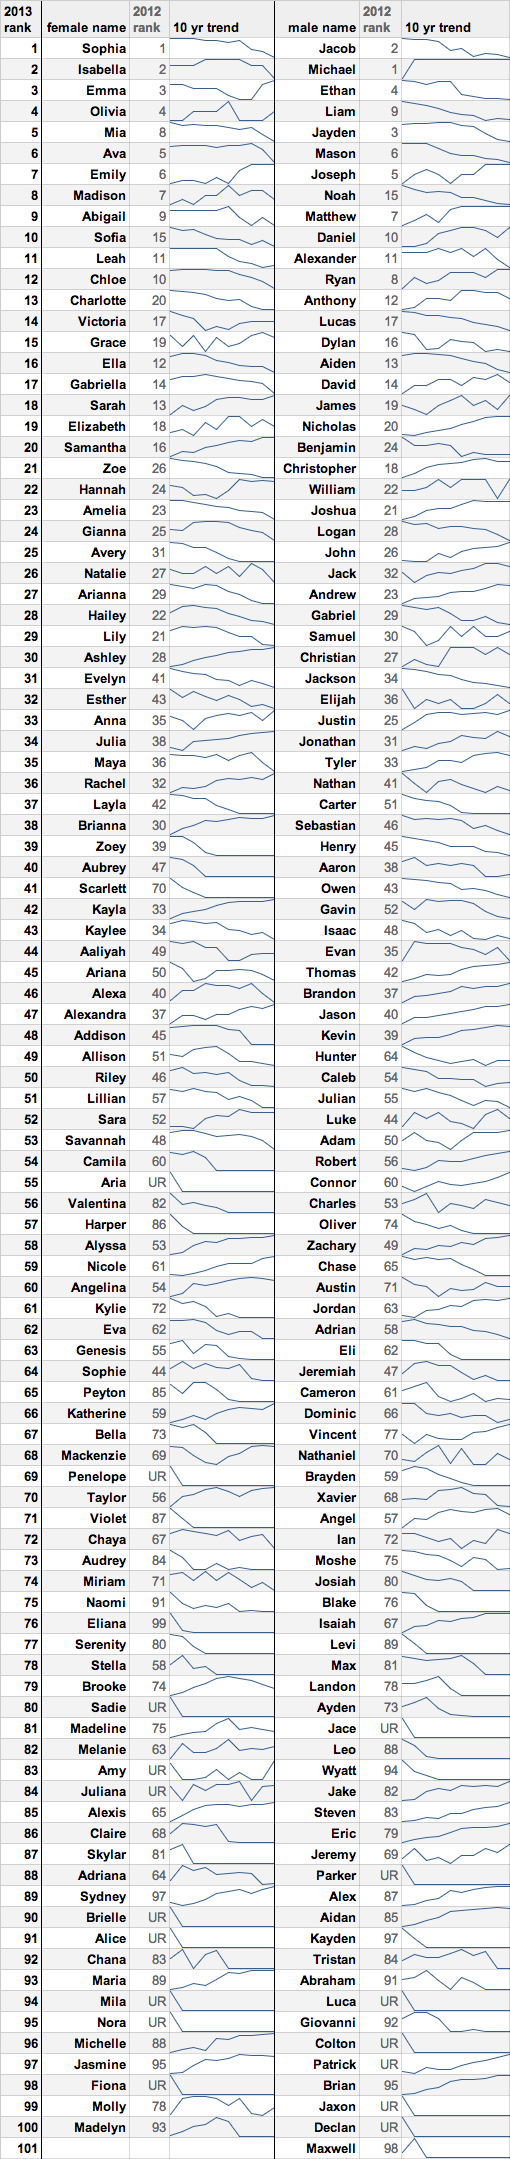 new_york_baby_names_2013_table.png